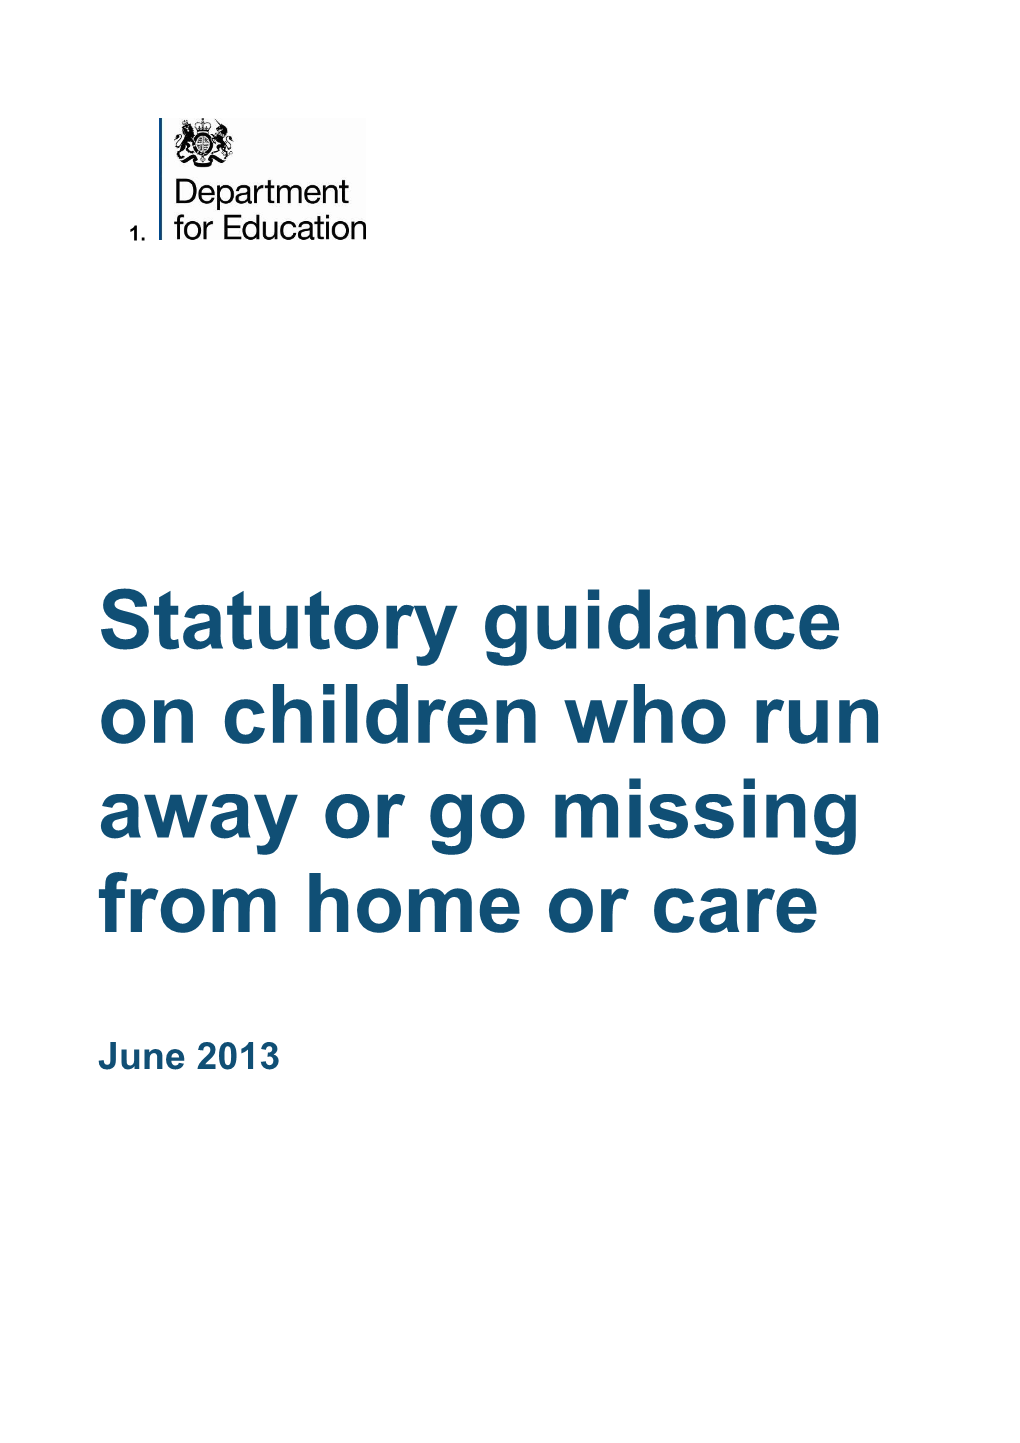 Statutory Guidance On Children Who Runaway Or Go Missing From Home Or Care